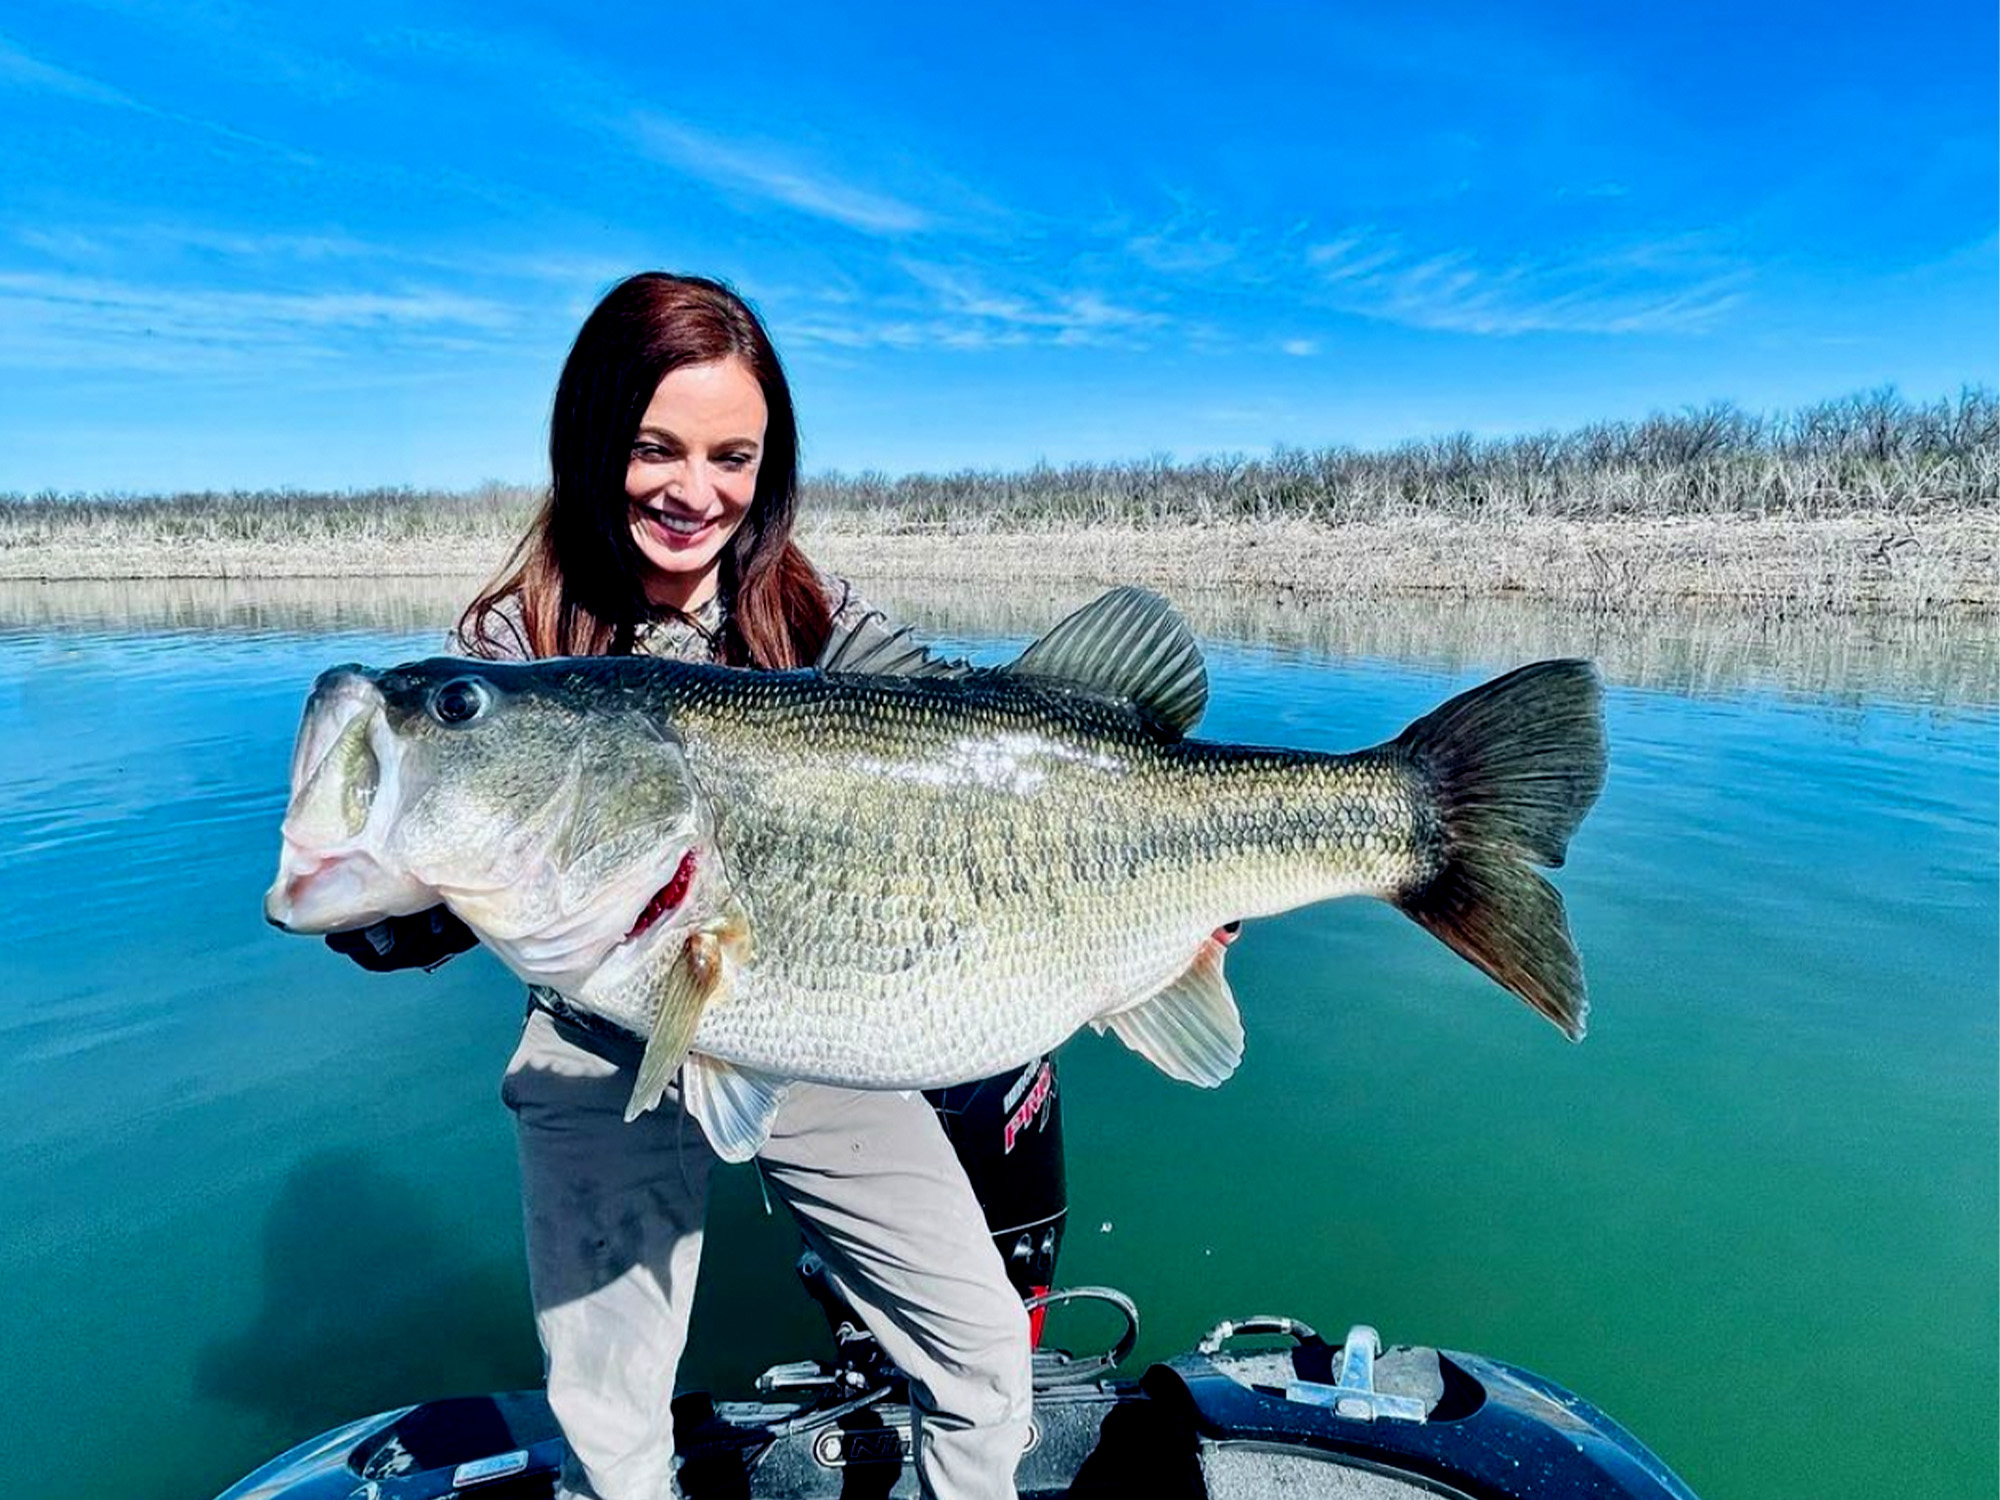 Video released of 14-pound monster bass catch